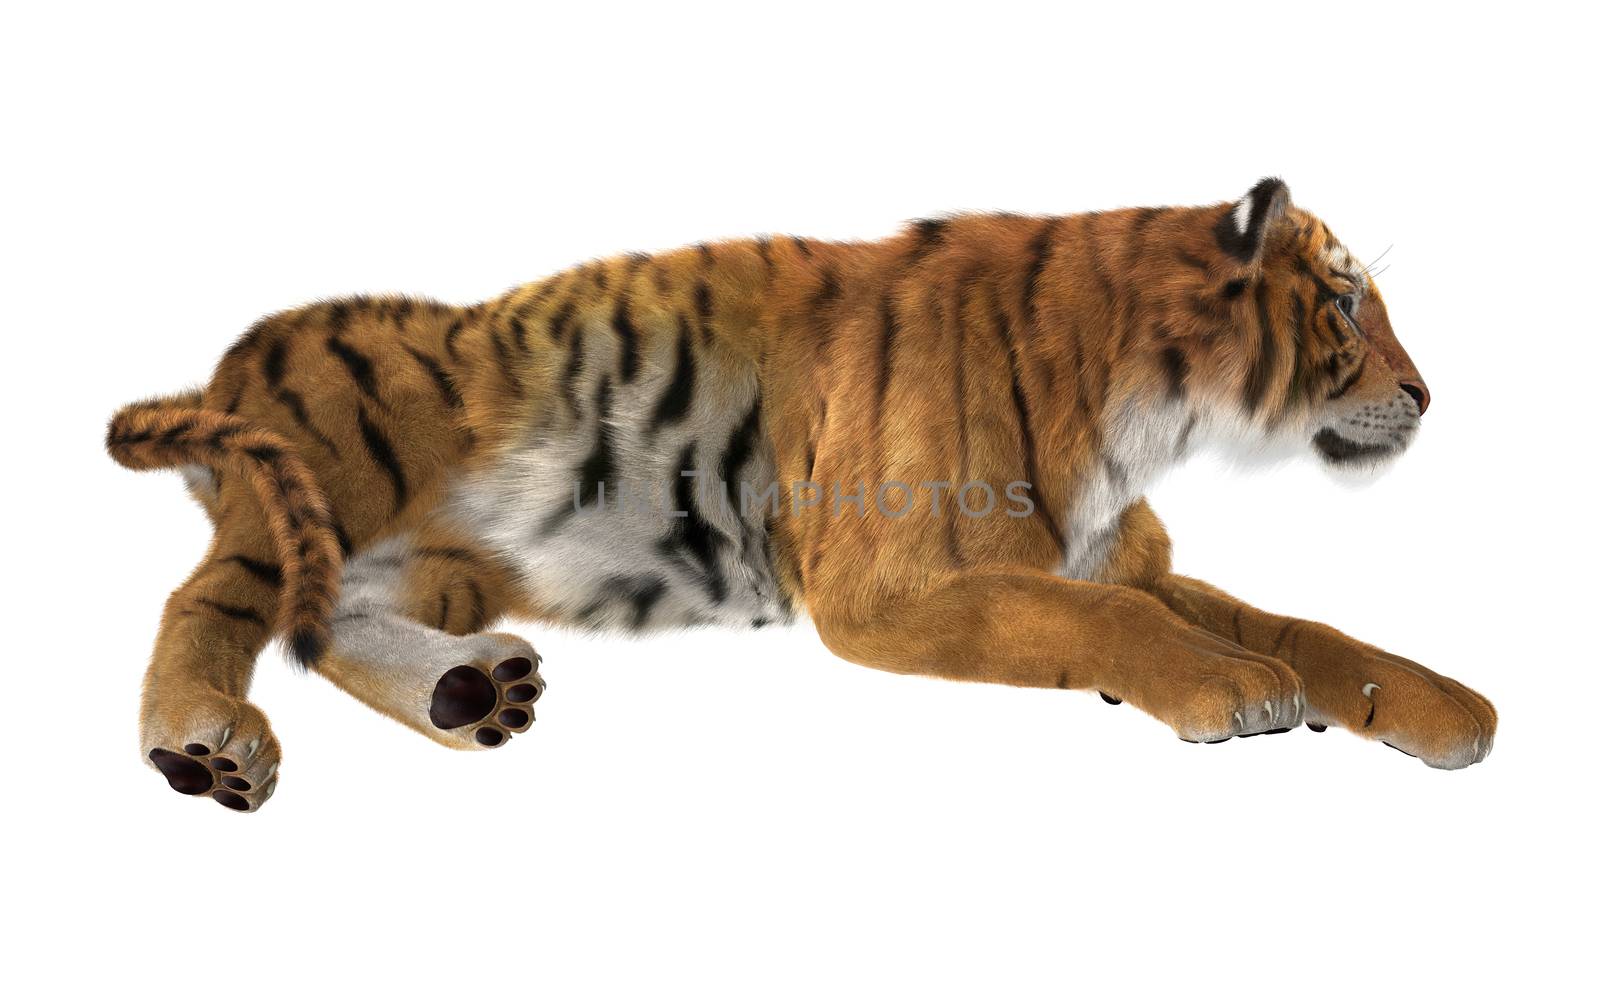 3D digital render of a tiger resting isolated on white background